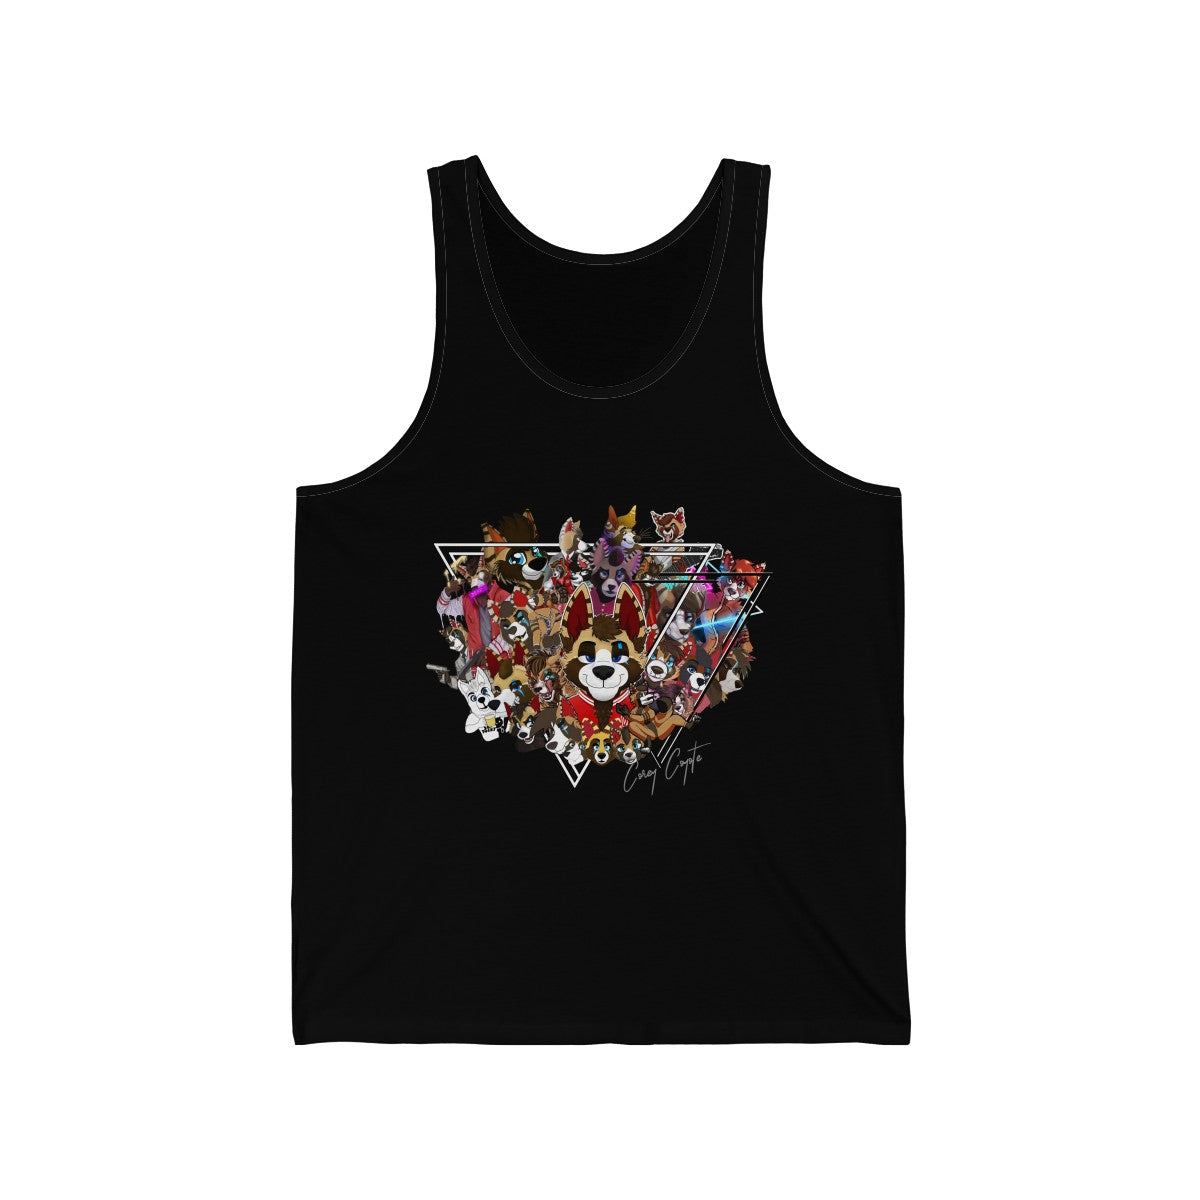 For The Fans - Tank Top Tank Top Corey Coyote Black XS 